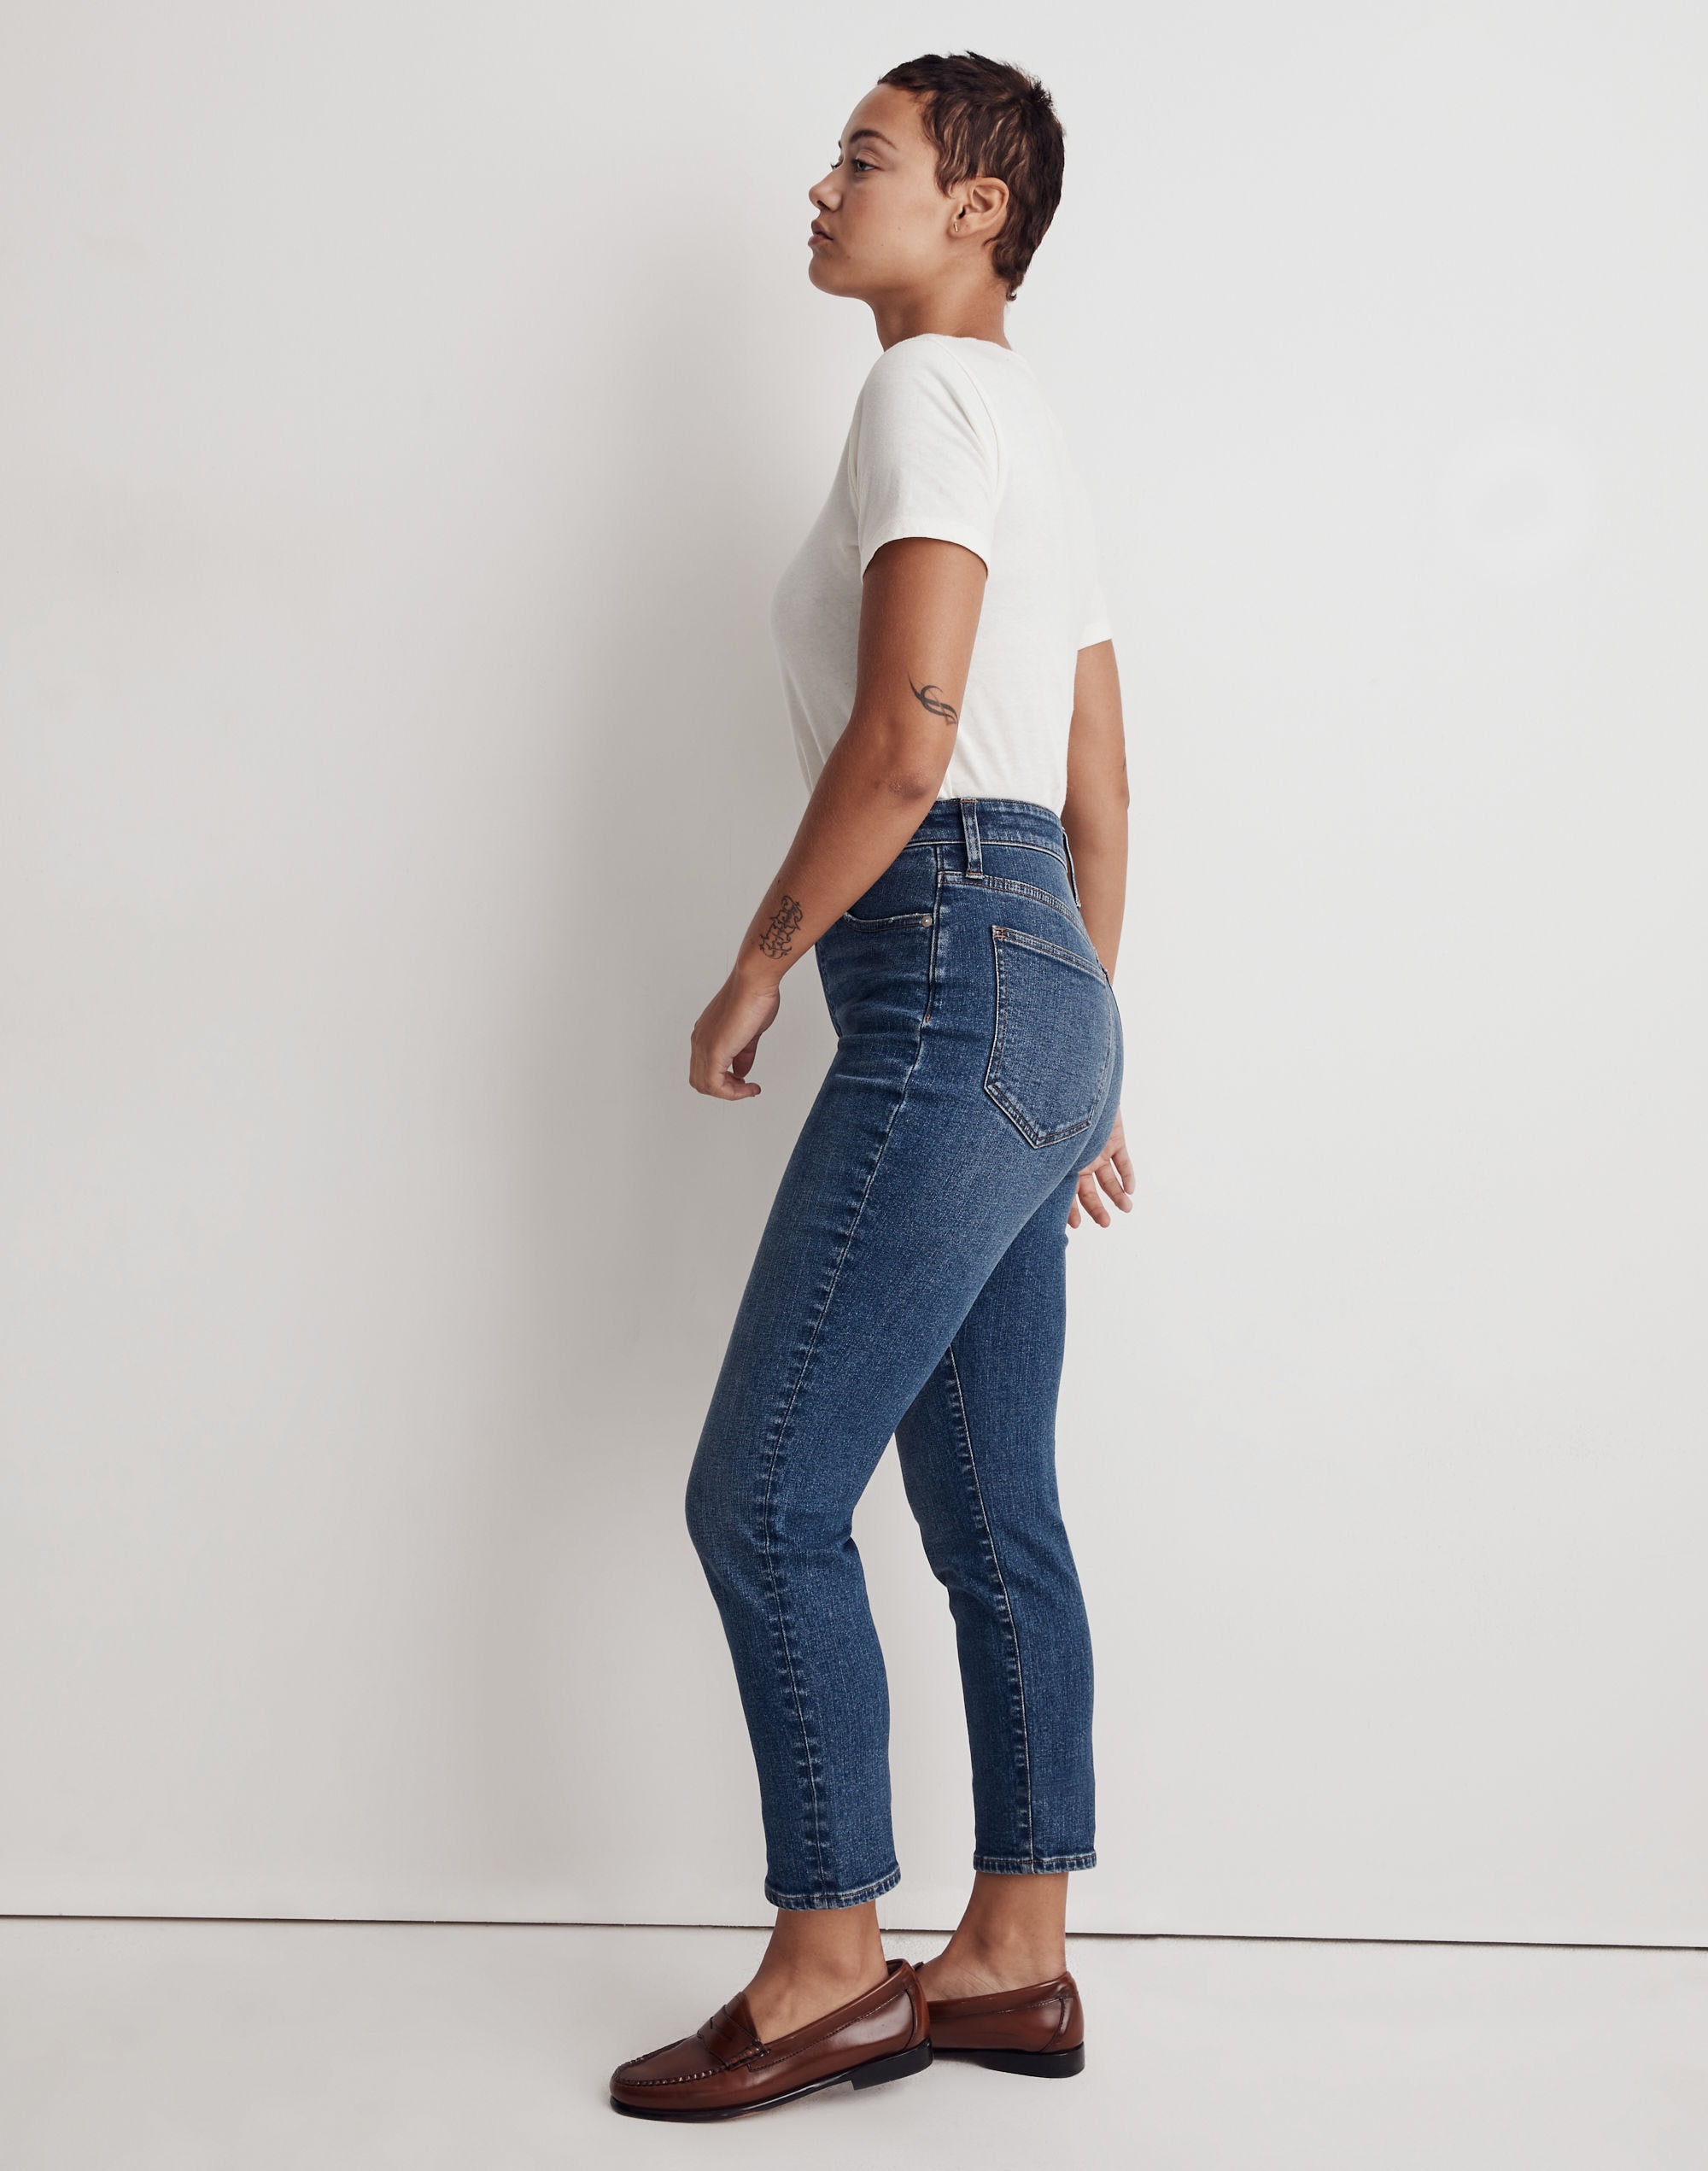 The Curvy Perfect Vintage Jean in Manorford Wash: Instacozy Edition